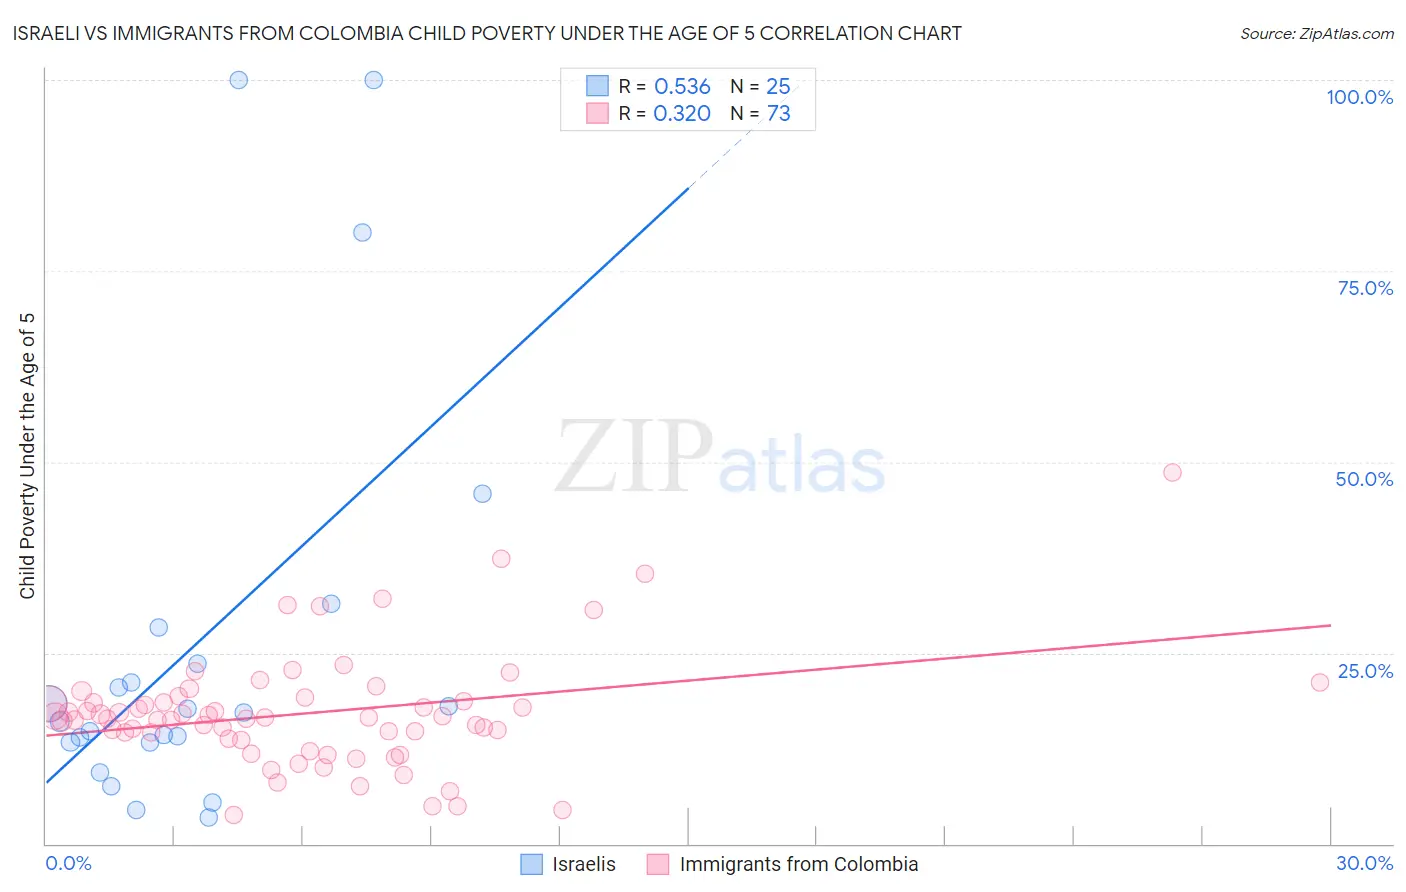 Israeli vs Immigrants from Colombia Child Poverty Under the Age of 5